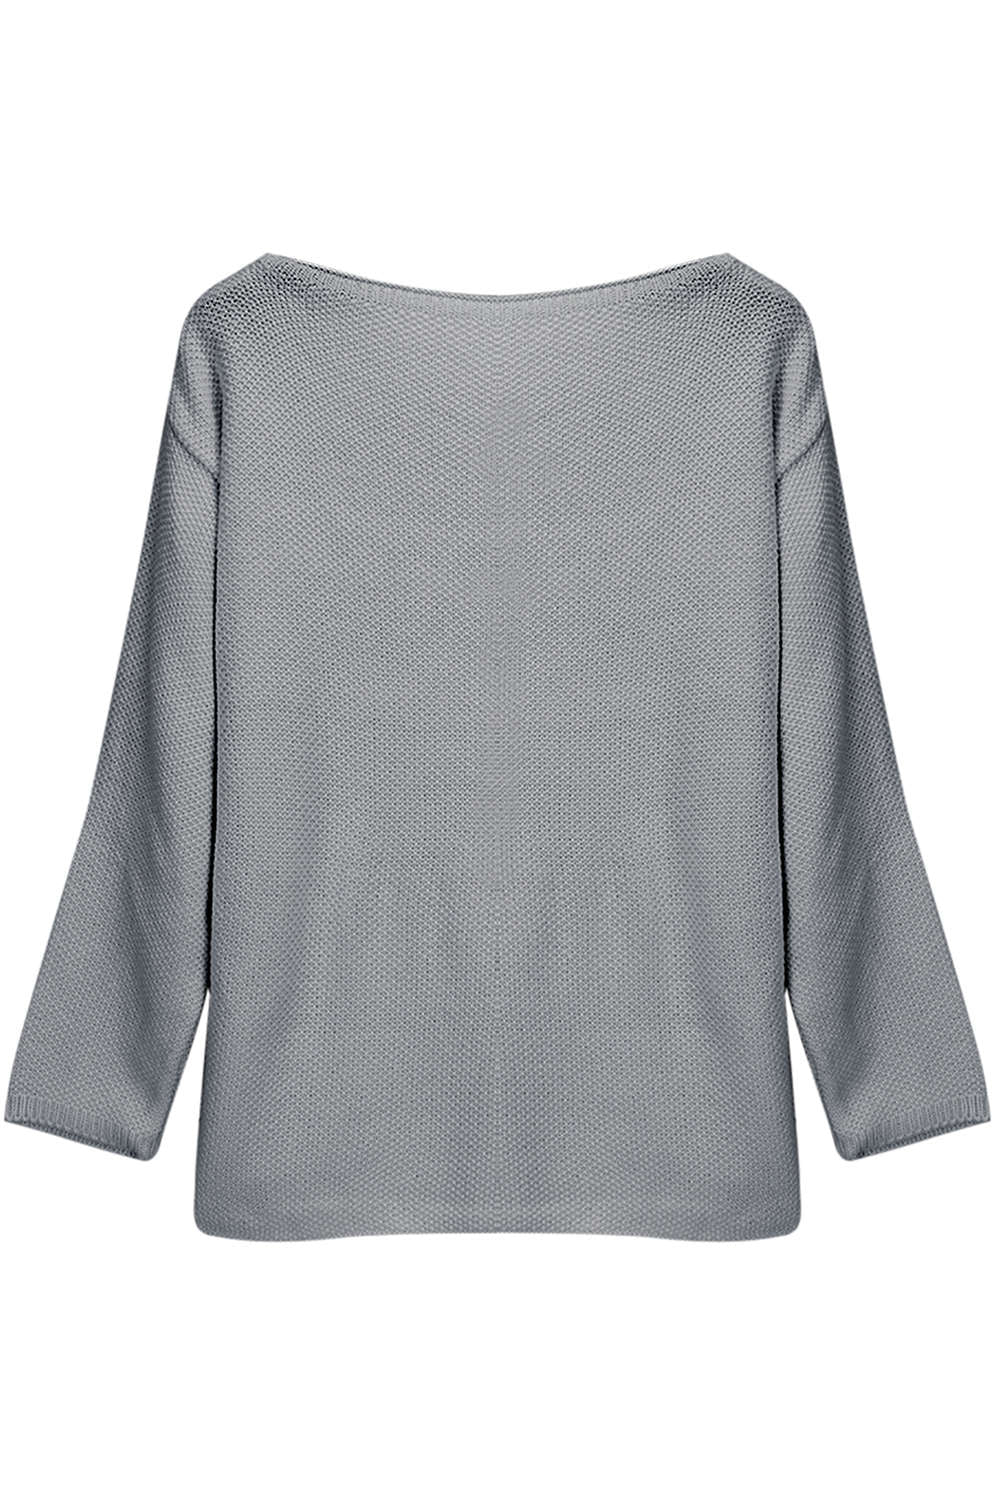 Iyasson Womens Solid V-Neck Knitted Pullover Spring Sweater